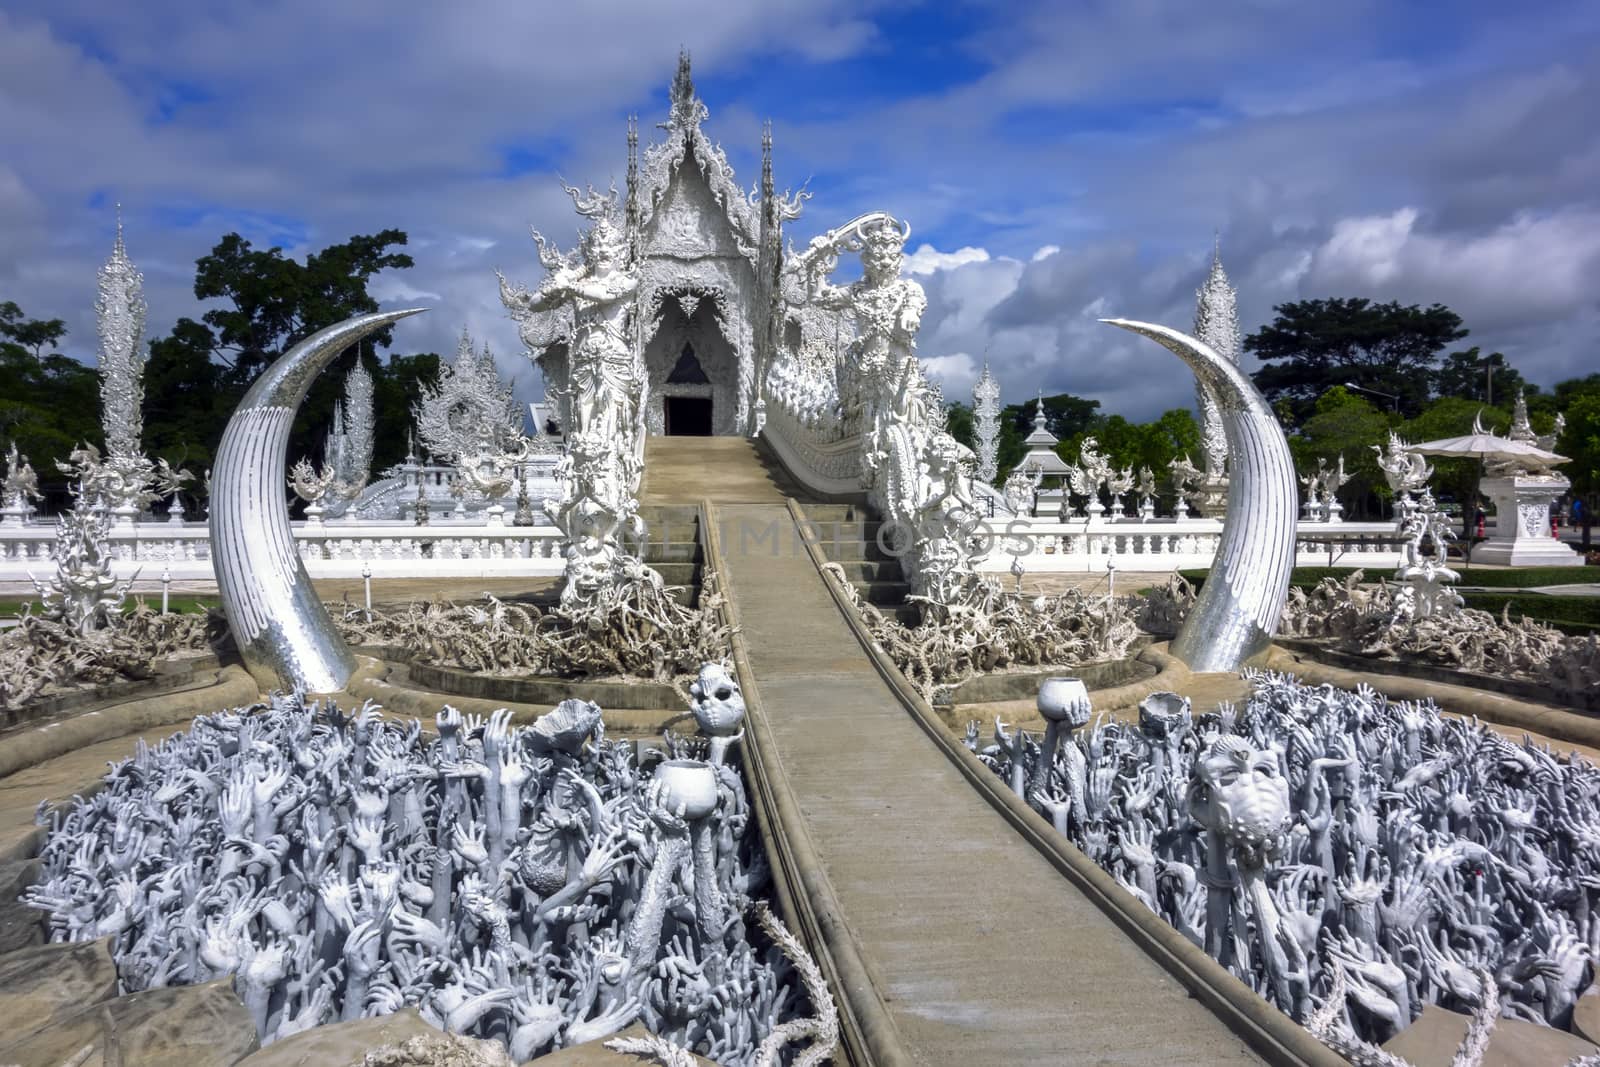 Wat Rong Khun. More well-known among foreigners as the White Temple in Chiang Rai, Thailand.